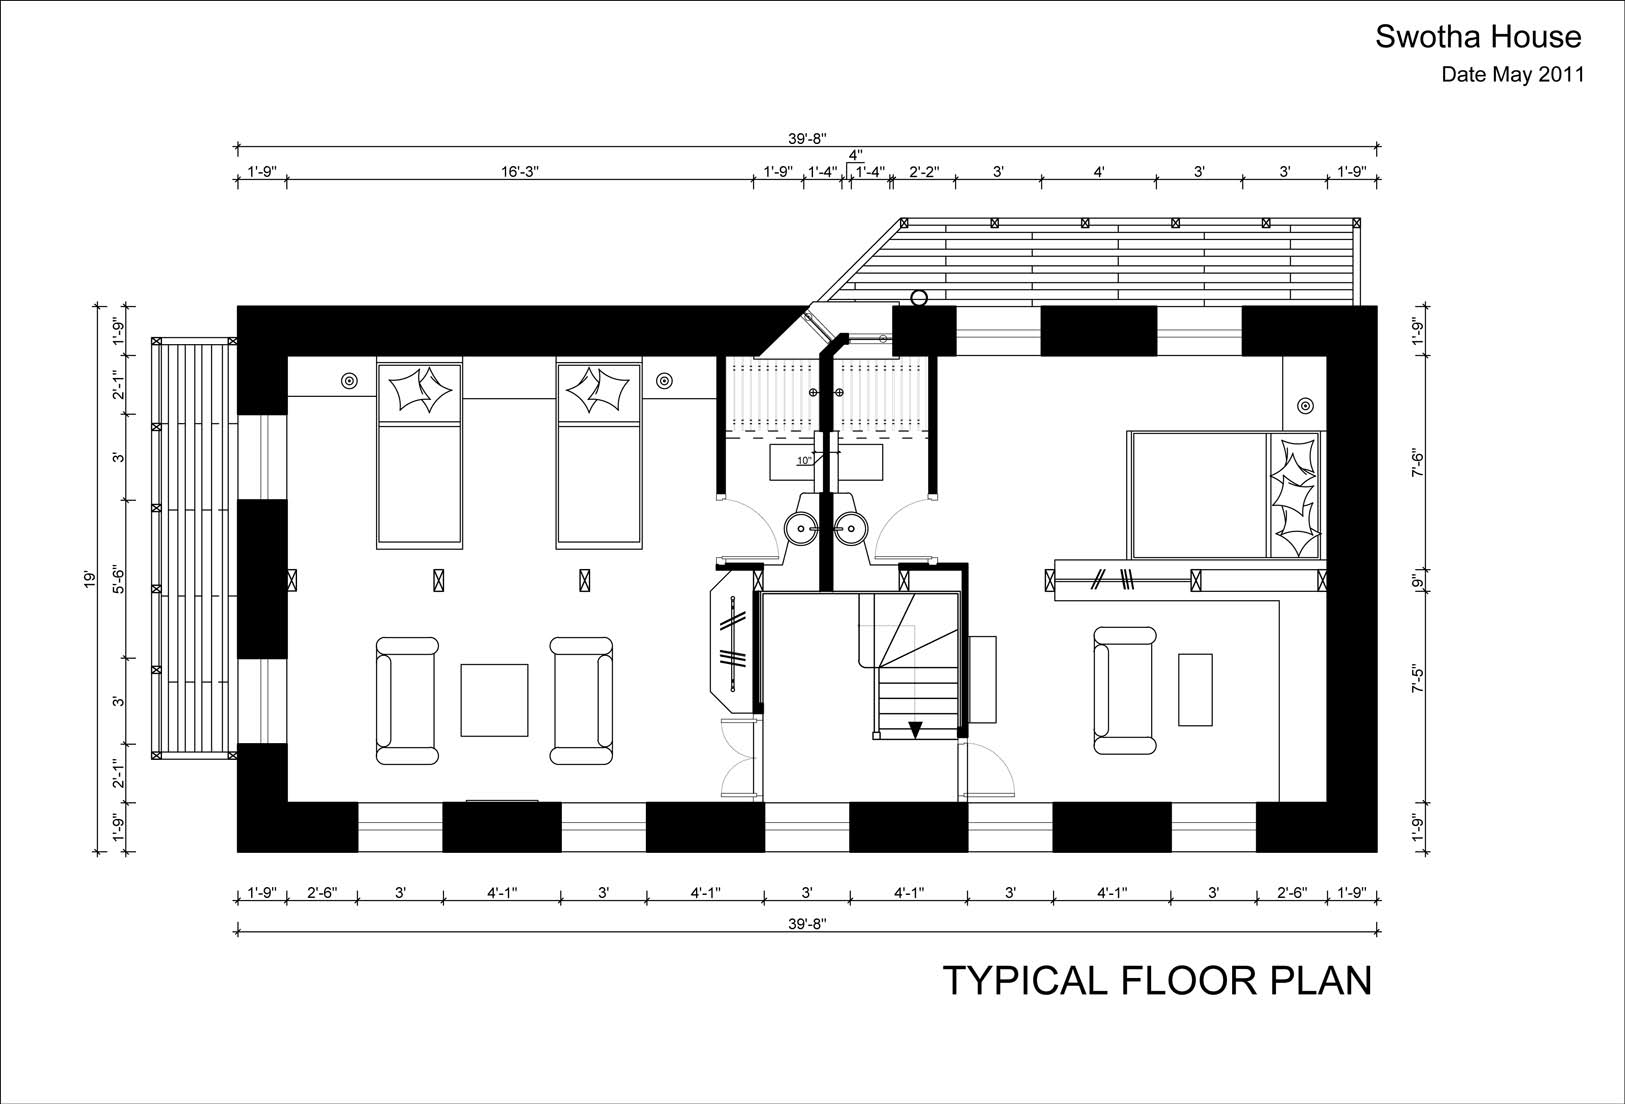 Floor plan of historical building with modern planning in in Patan Nepal.